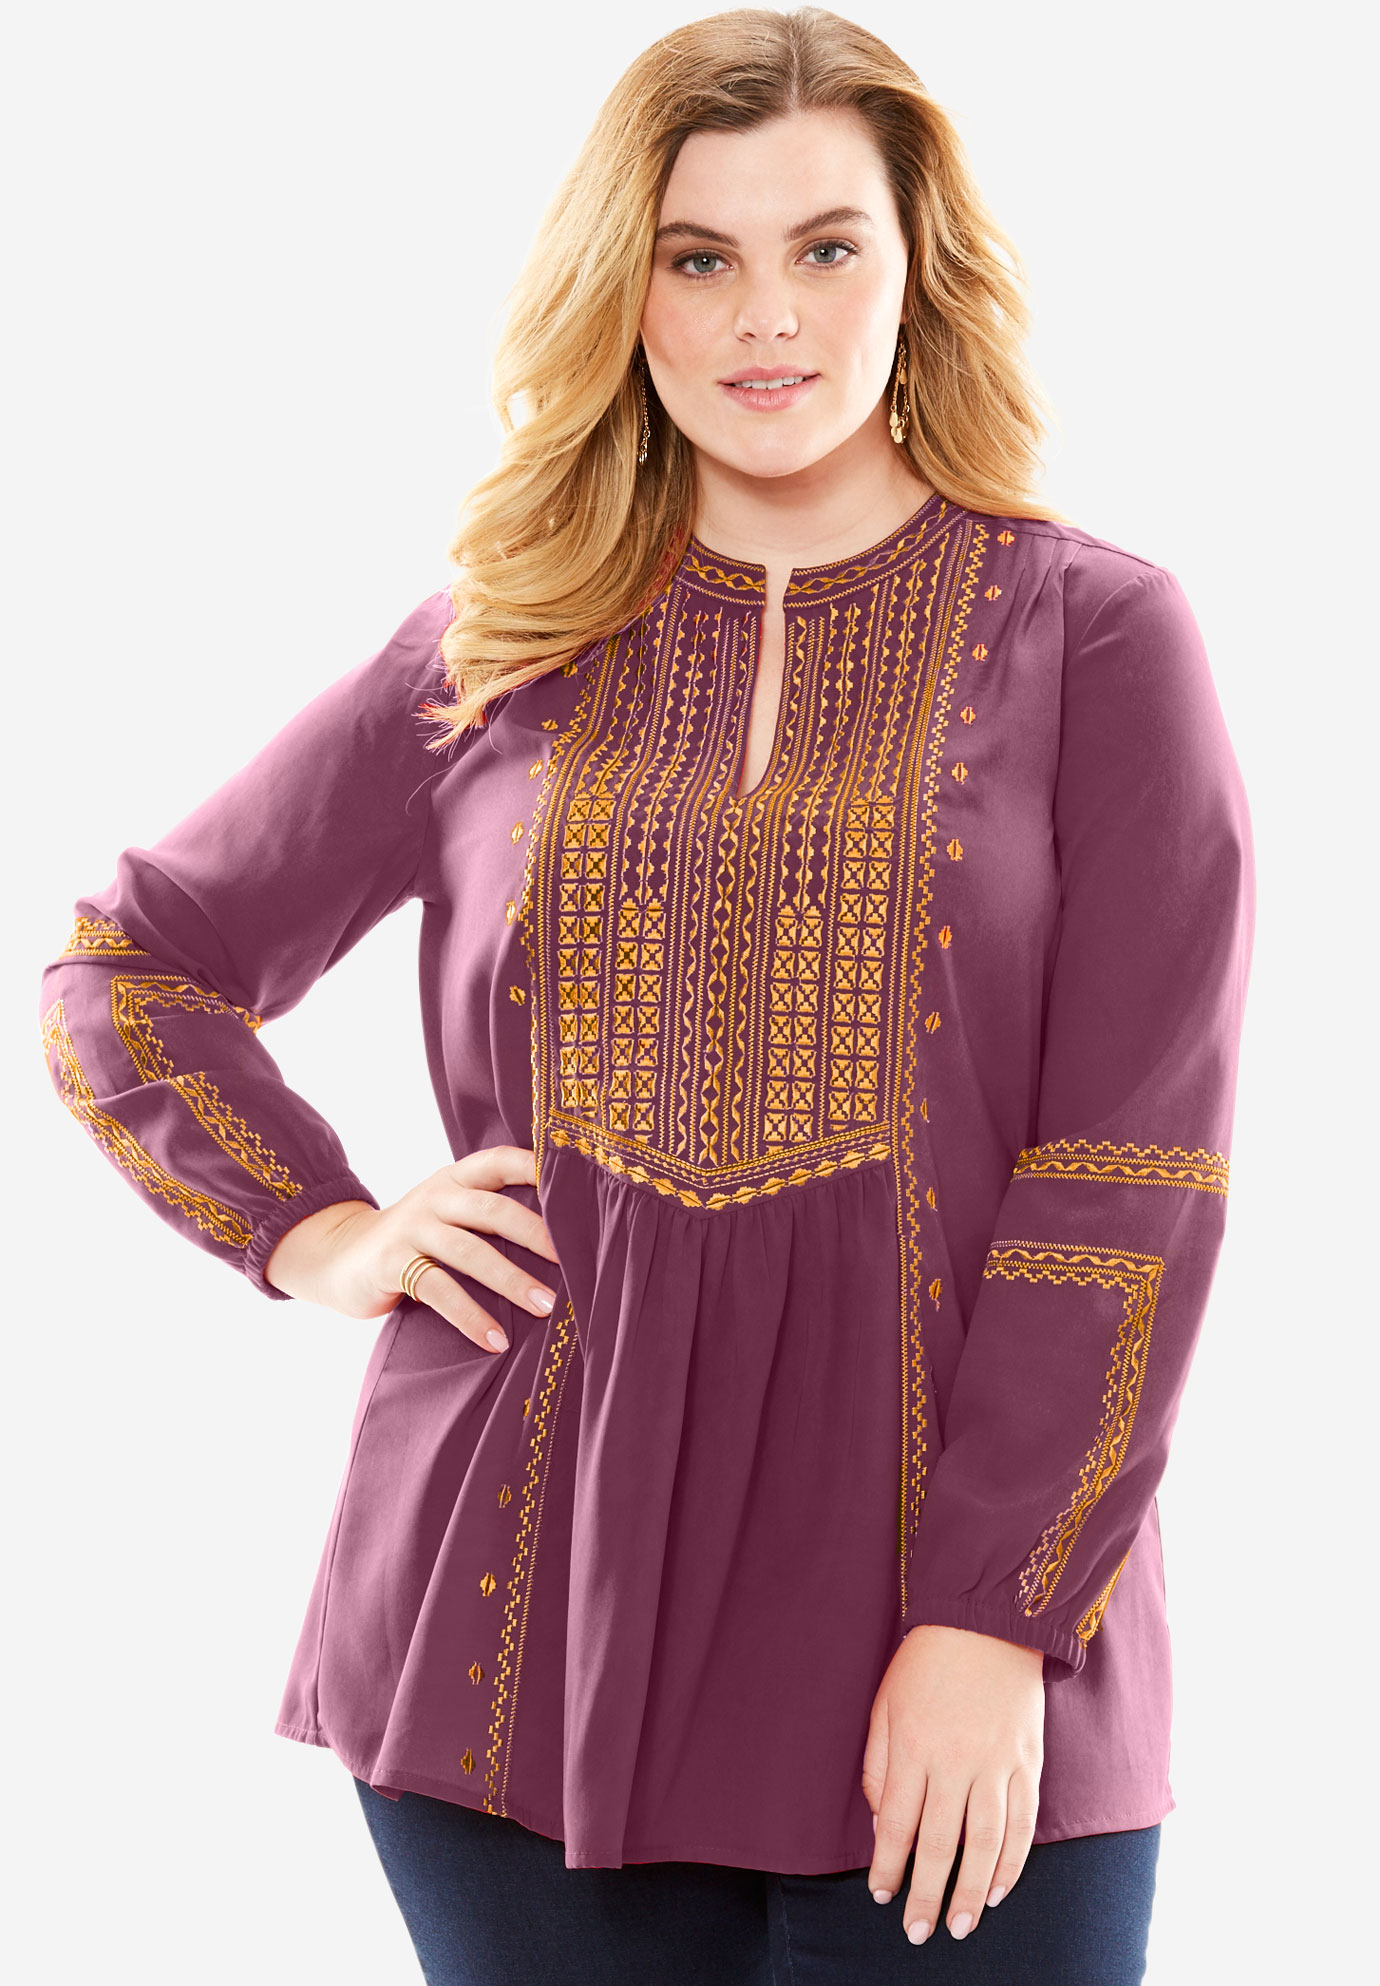 embroidered-boho-plus-size-tops-roaman-s